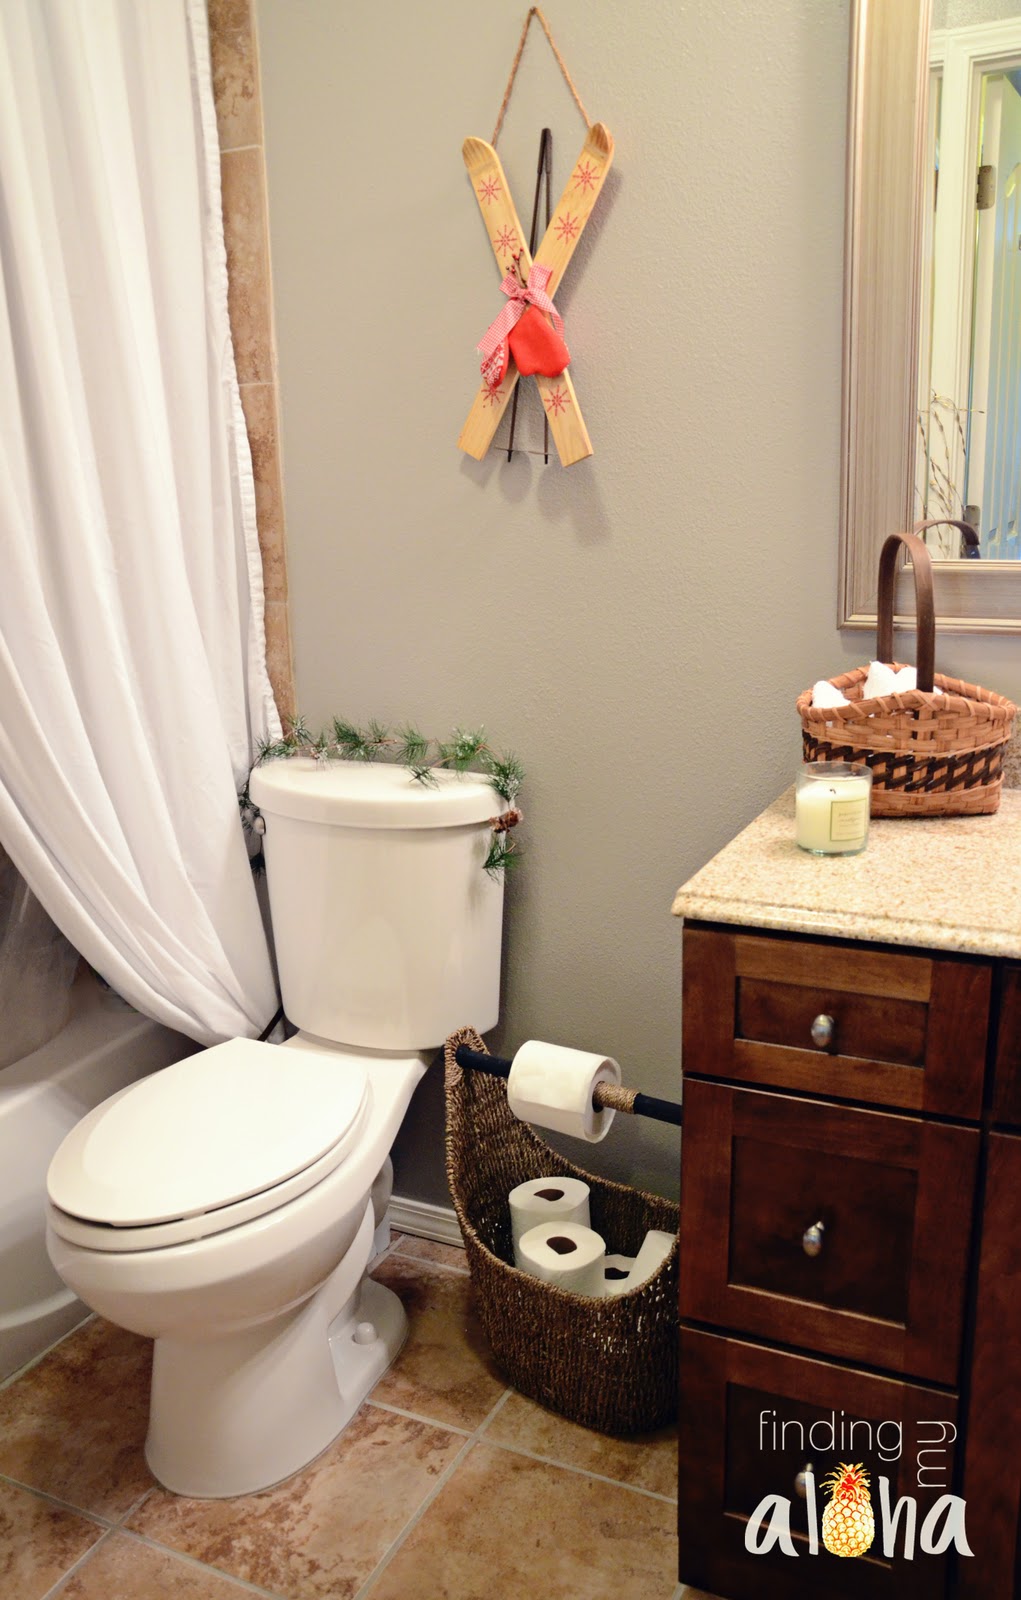 Finding My Aloha Decorating bathrooms for Christmas tips & a tour